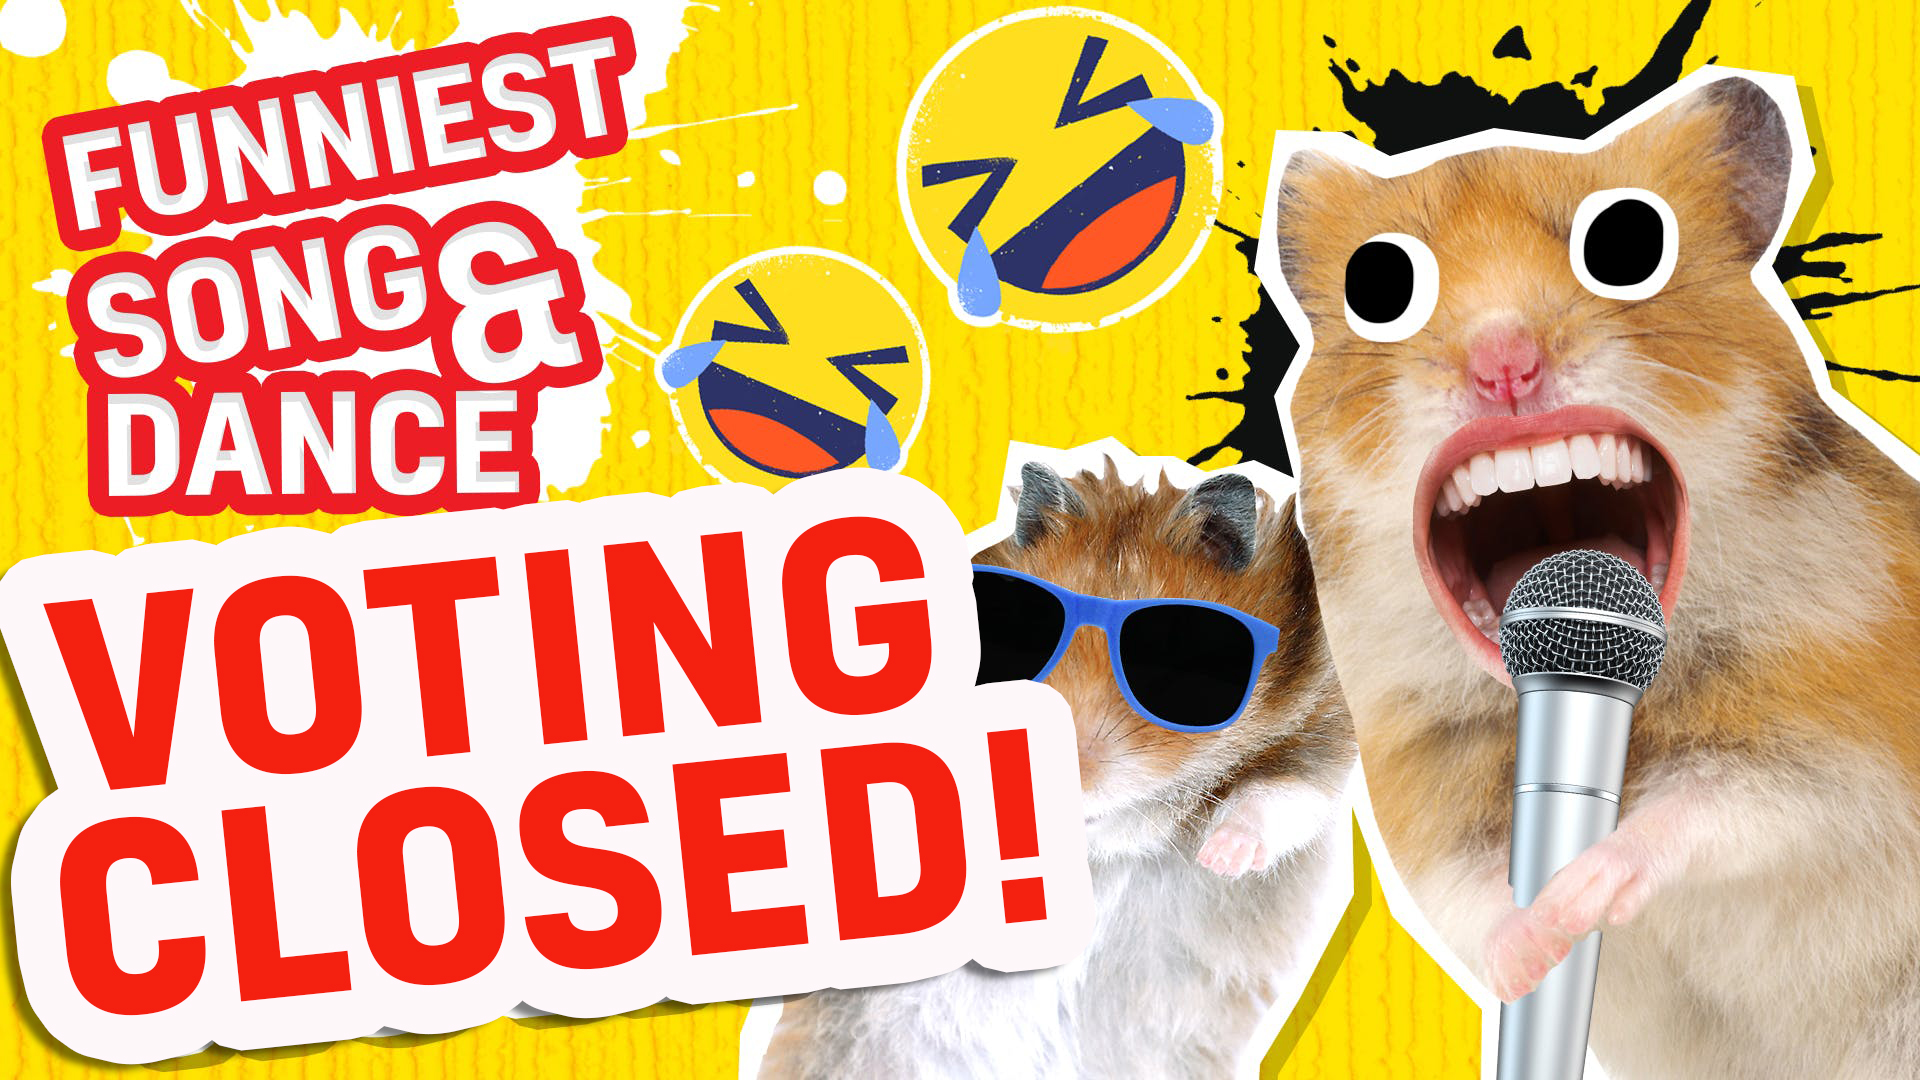 Britain’s Funniest Song & Dance - Voting Closed!